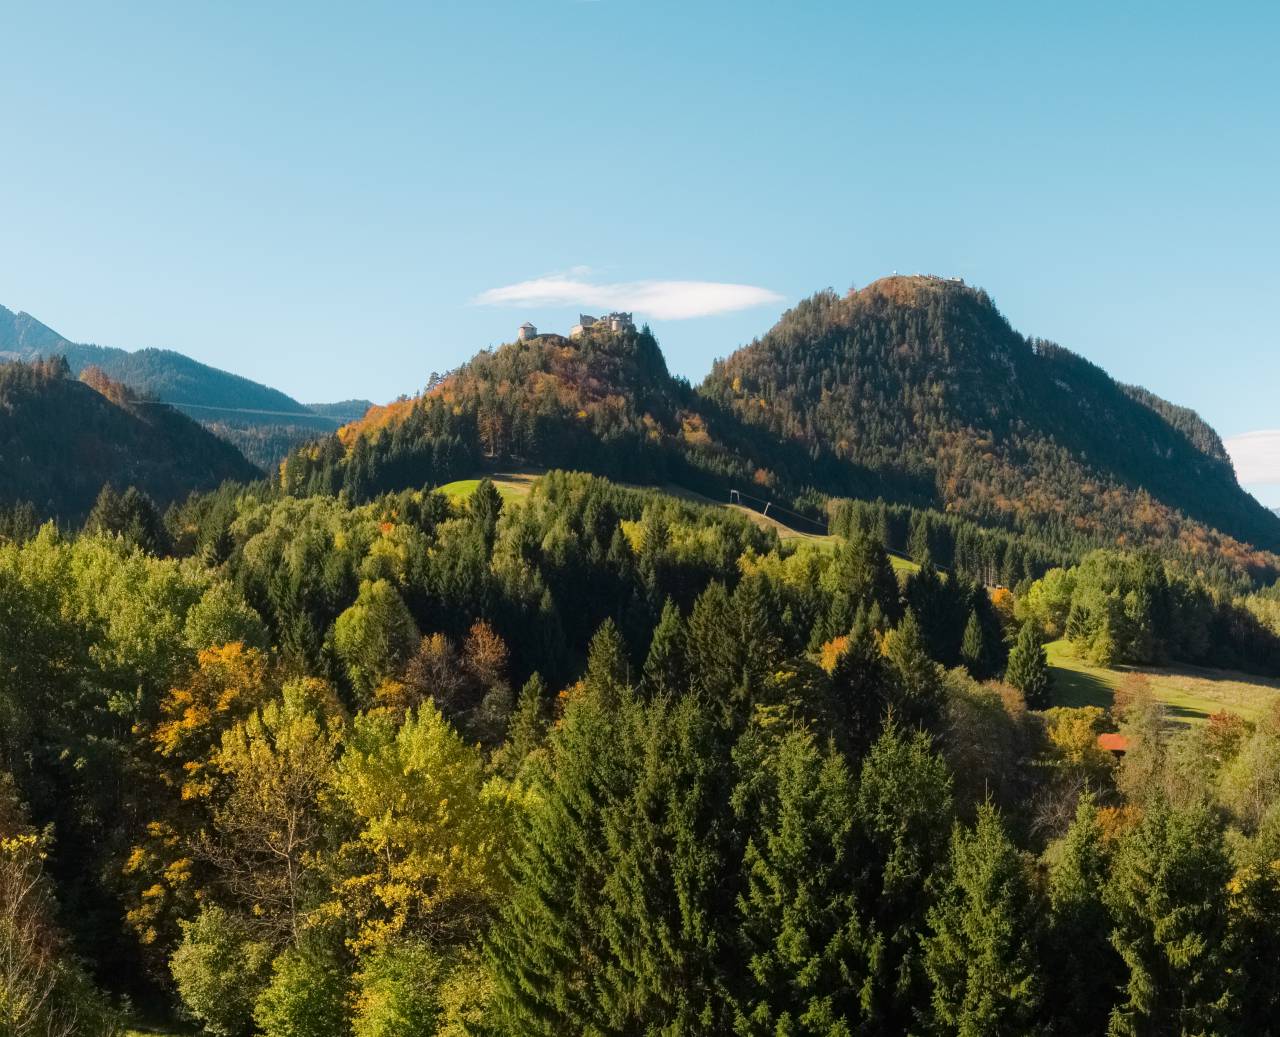 Forests and trees in autumn colors on the mountains in the sunshine